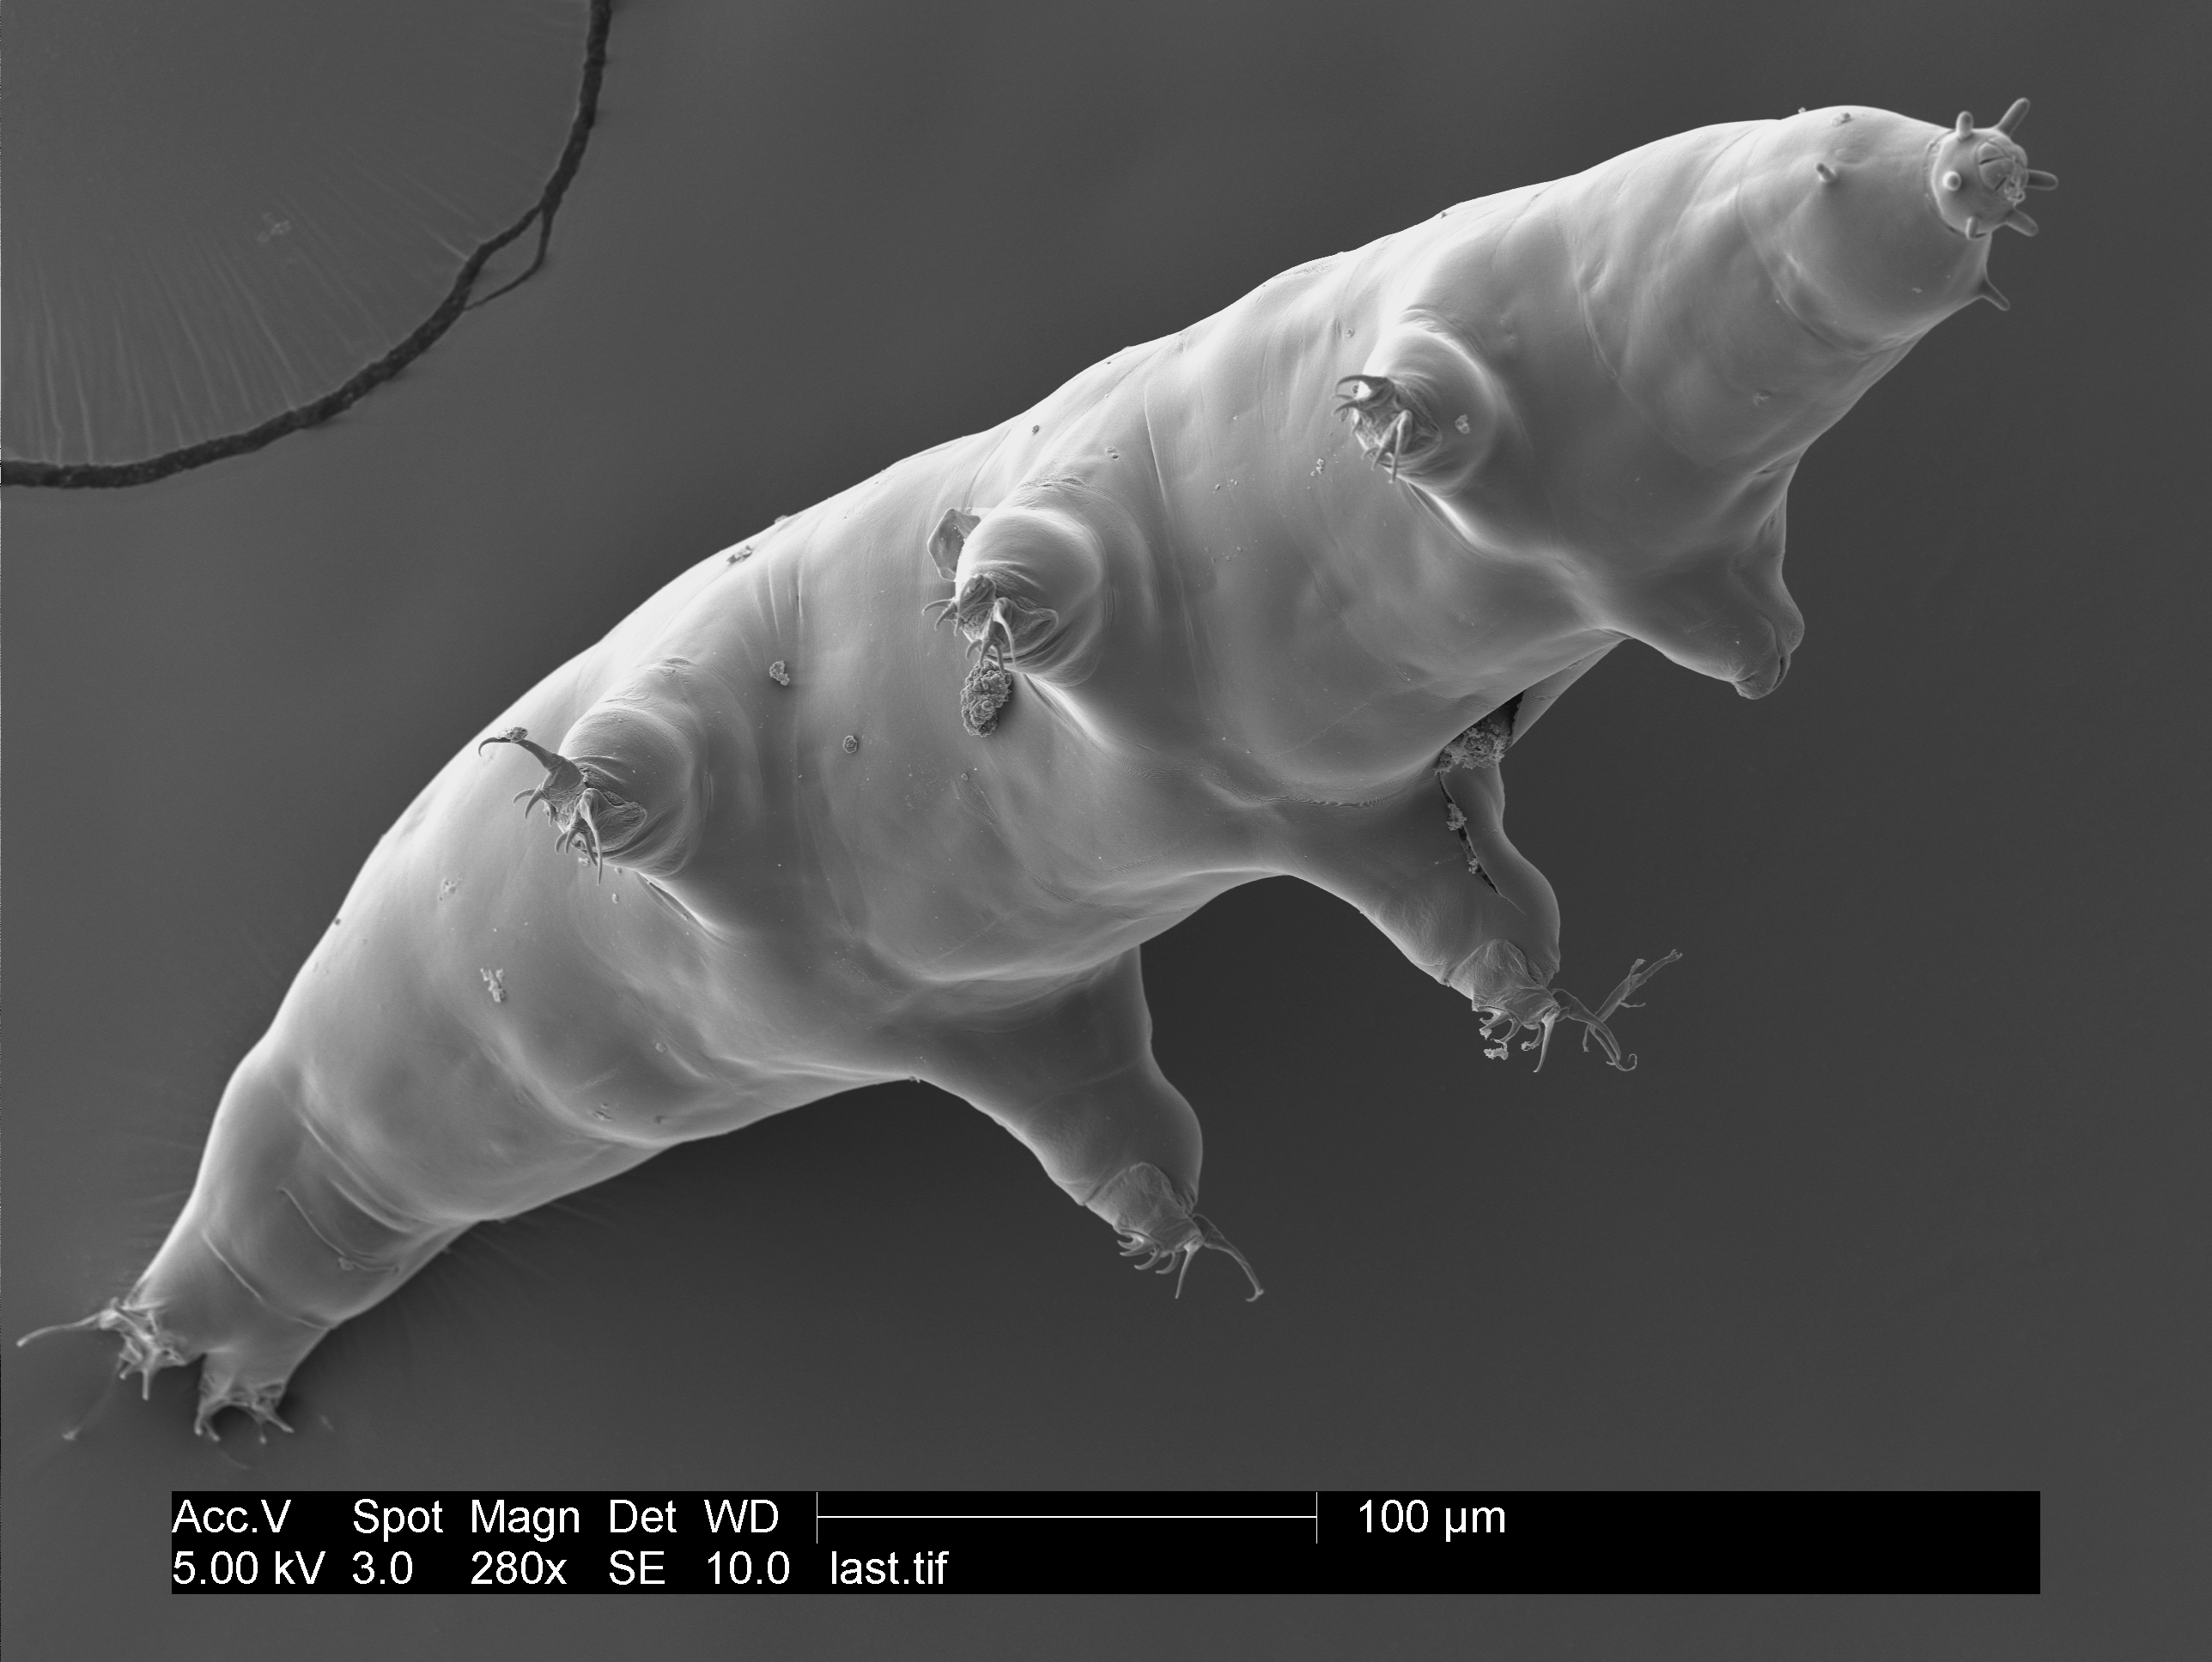 "Waterbear genome shares some DNA with some unexpected animals."